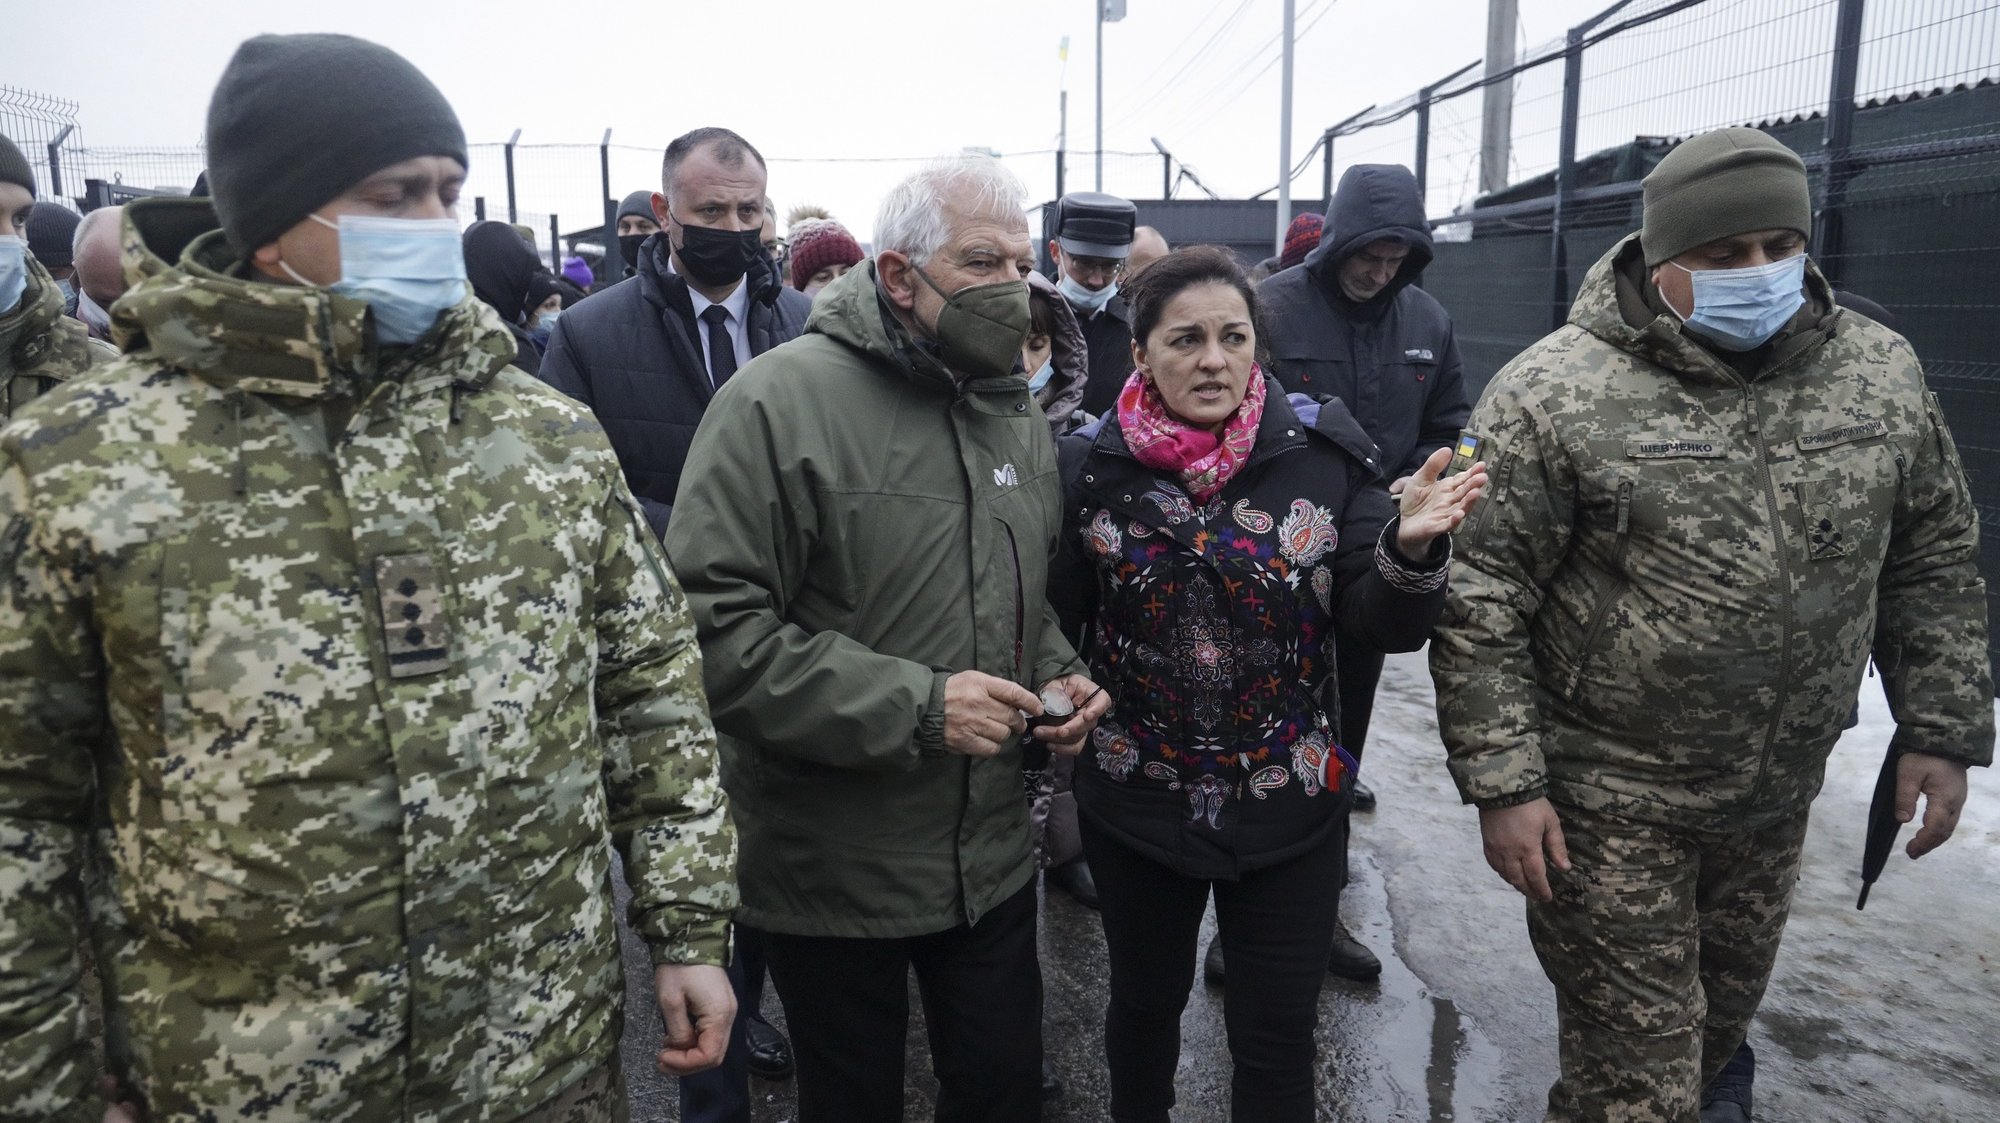 epa09667912 European Union foreign policy chief Josep Borrell (C) visits the &#039;Stanitsa Luganskaya&#039; border crossing between Ukraine and territory controlled by pro-Russian militants in the Luhansk area, Ukraine, 05 January 2022. Josep Borrell, High Representative of the European Union for Foreign Affairs and Security Policy, together with Ukrainian Foreign Minister Dmytro Kuleba visit the war zone in Eastern Ukraine amid increasing Russian military power on the Ukraine-Russian border.  EPA/STANISLAV KOZLIUK